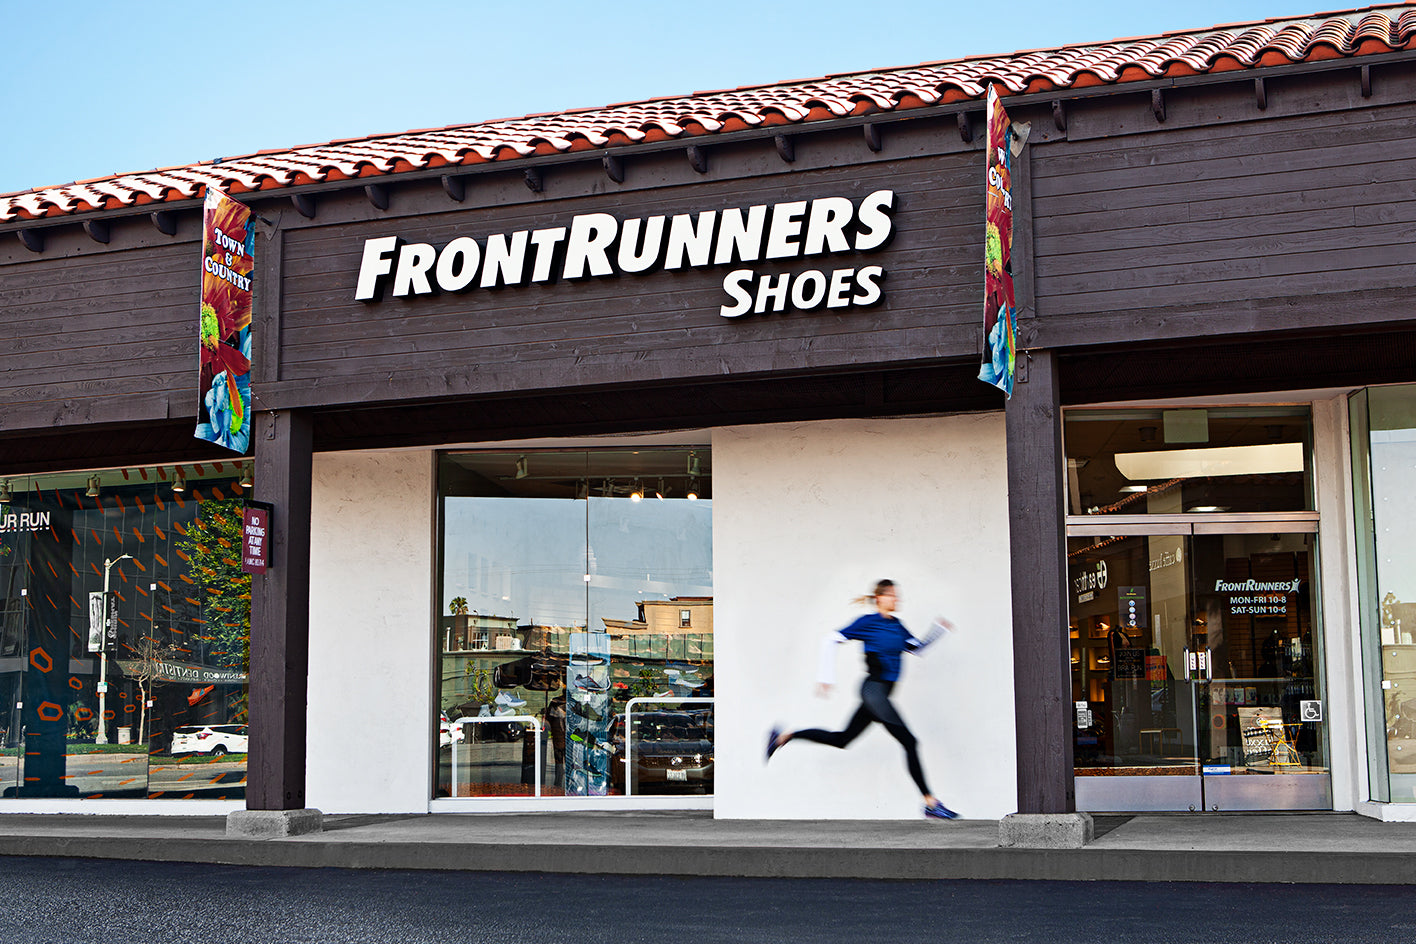 About Frontrunners